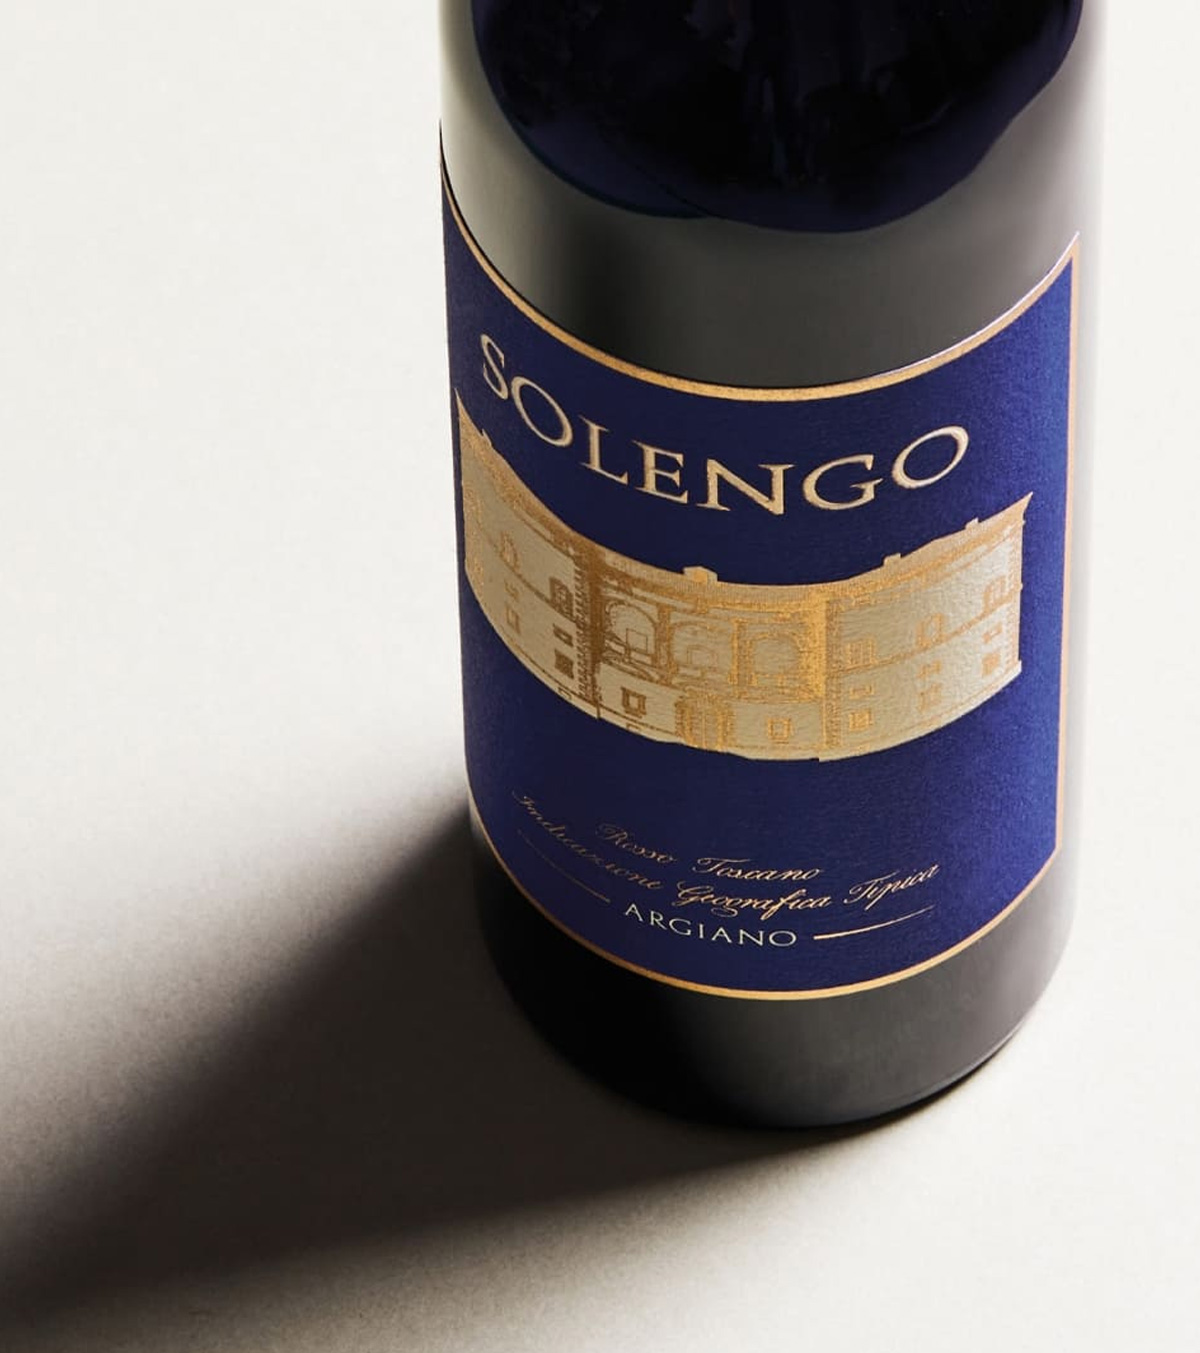 Solengo by Argiano imported by Maze Row Wines